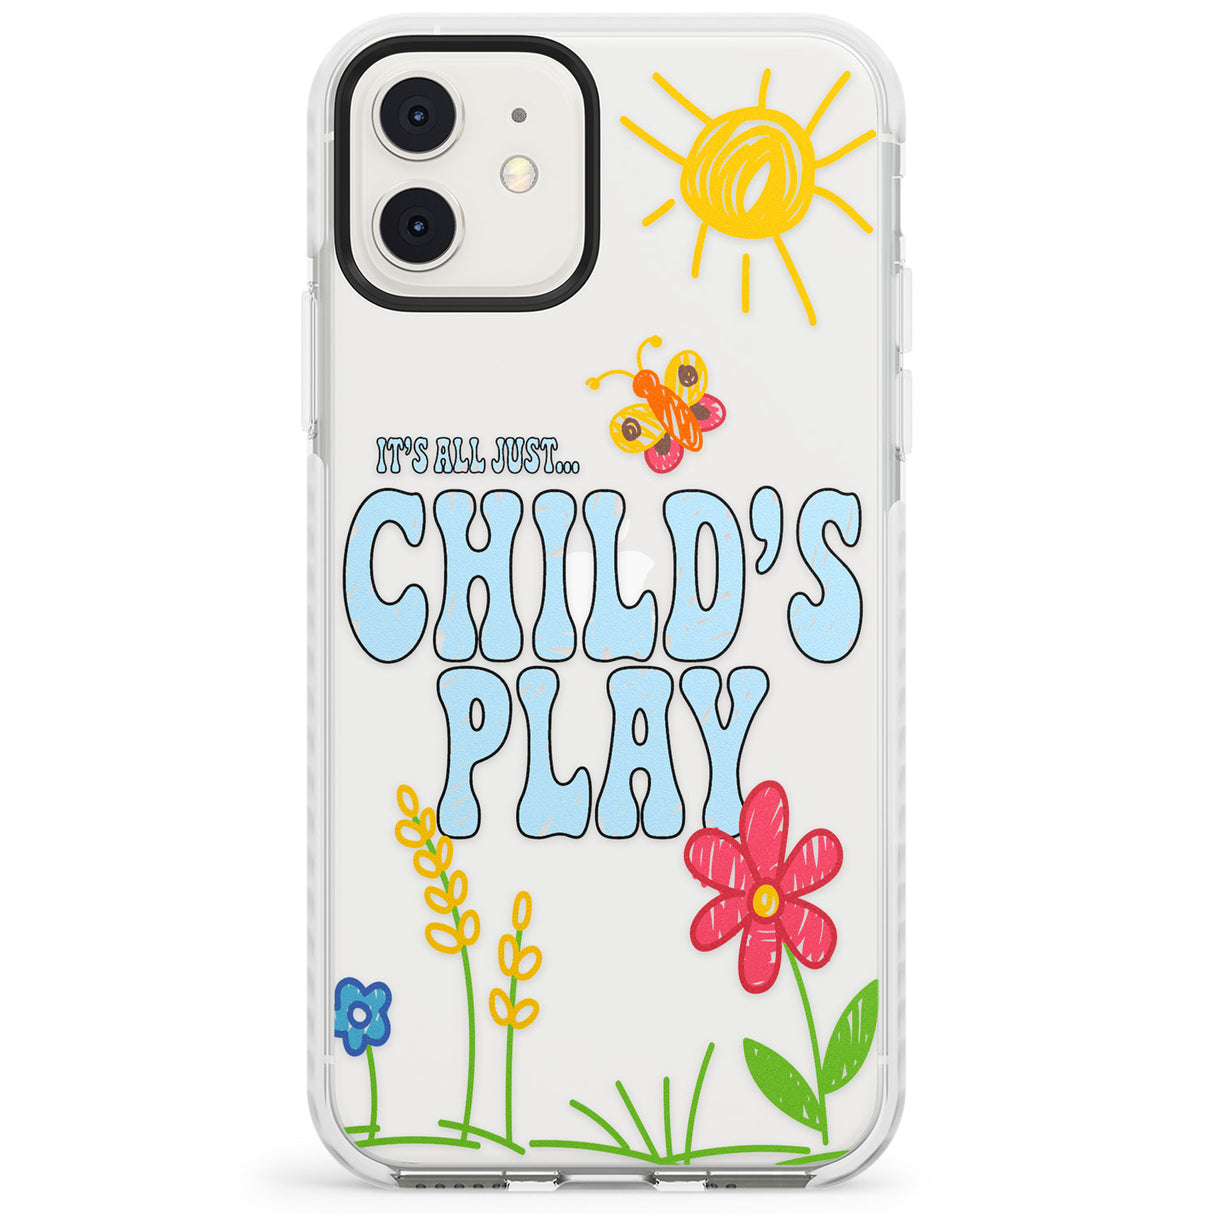 Child's Play Impact Phone Case for iPhone 11, iphone 12